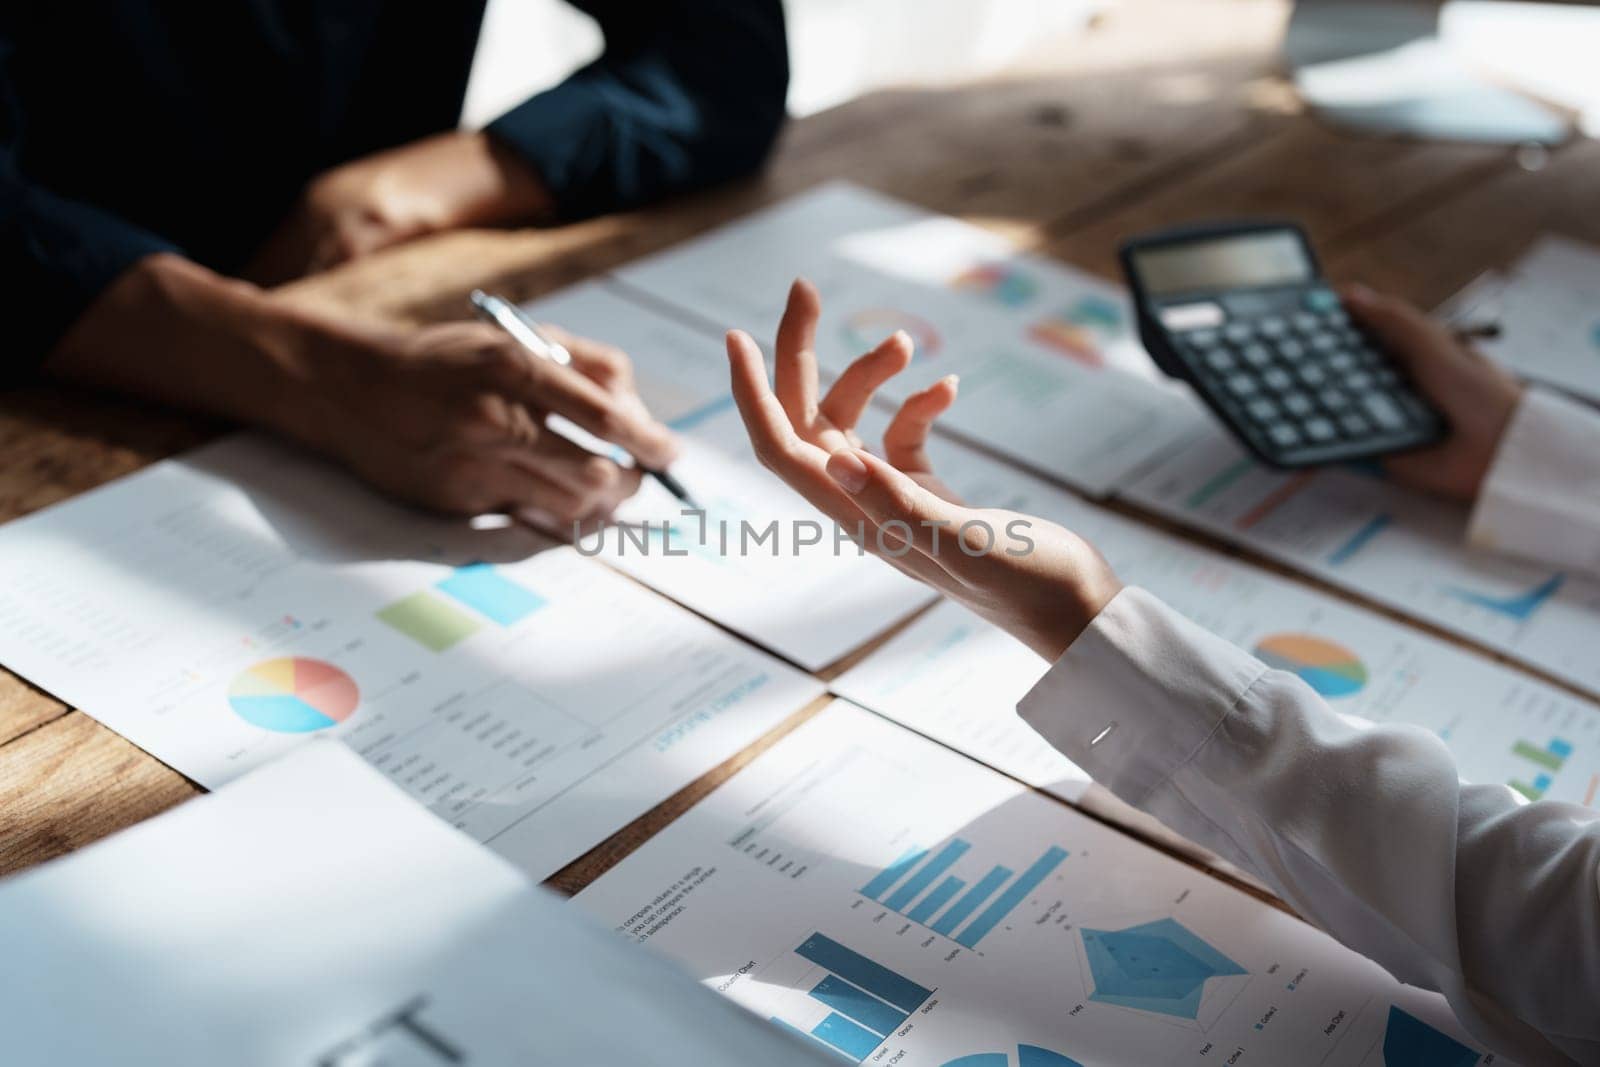 Accountant checking financial statement or counting by calculator income for tax form, Business woman sitting and working with colleague discussing the desk in office. Audit concept by Manastrong